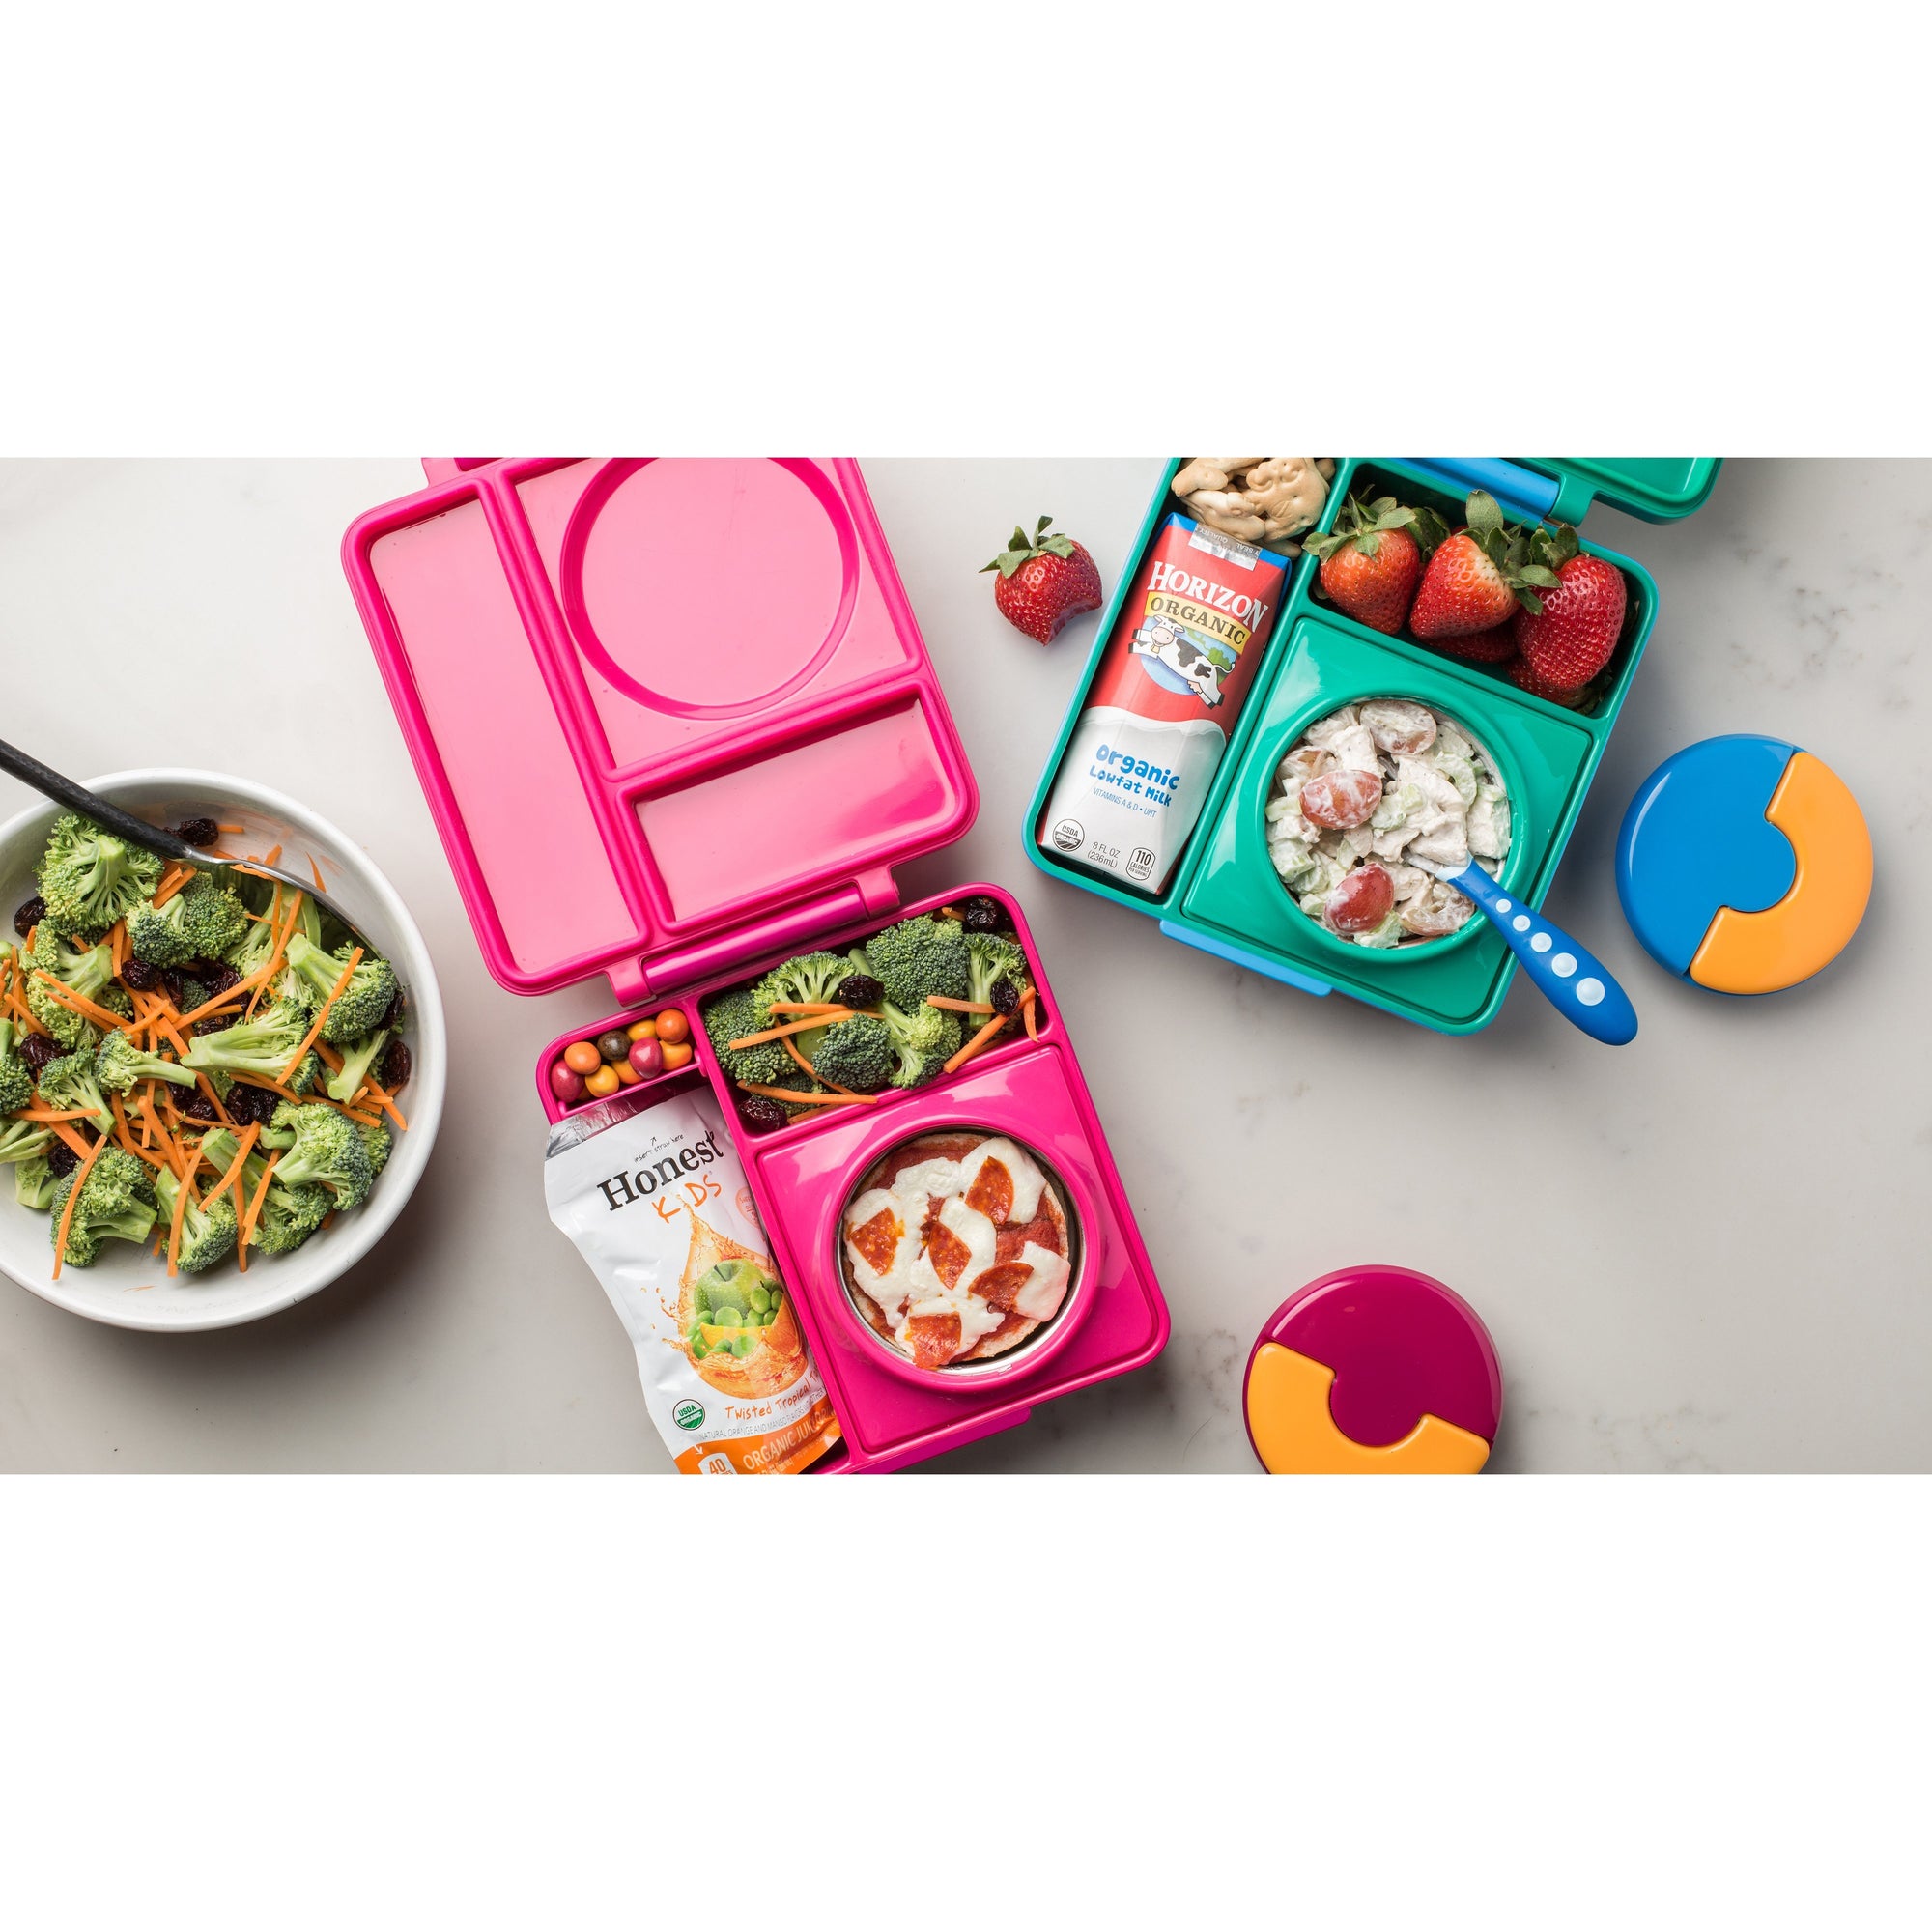 Buy OmieBox Hot & Cold Bento Lunch Box V2 - Meadow – Biome Online